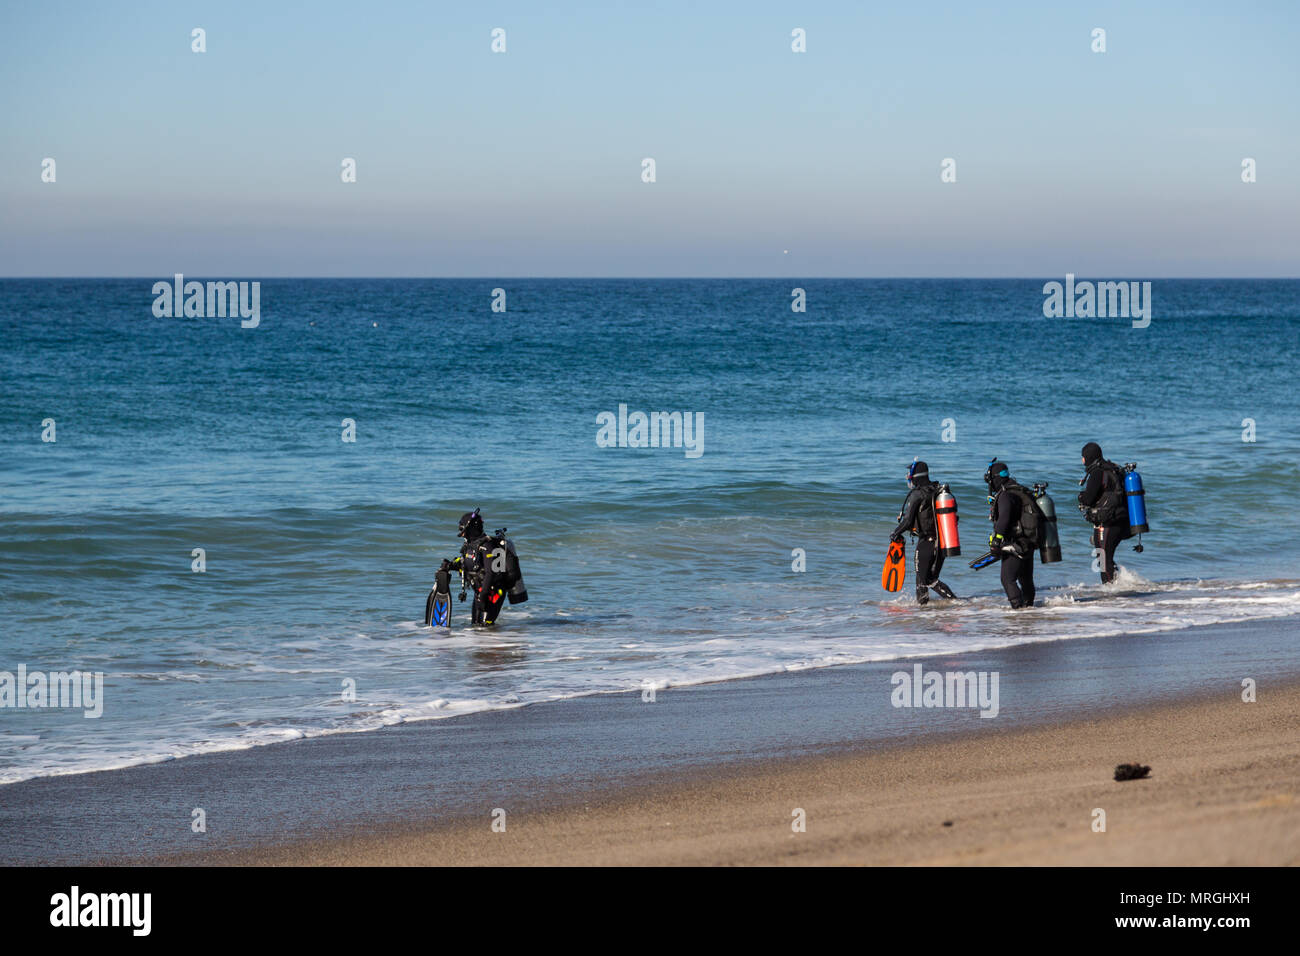 A group of scuba divers enters the water for a beach dive (shore dive) in Malibu, California. Stock Photo